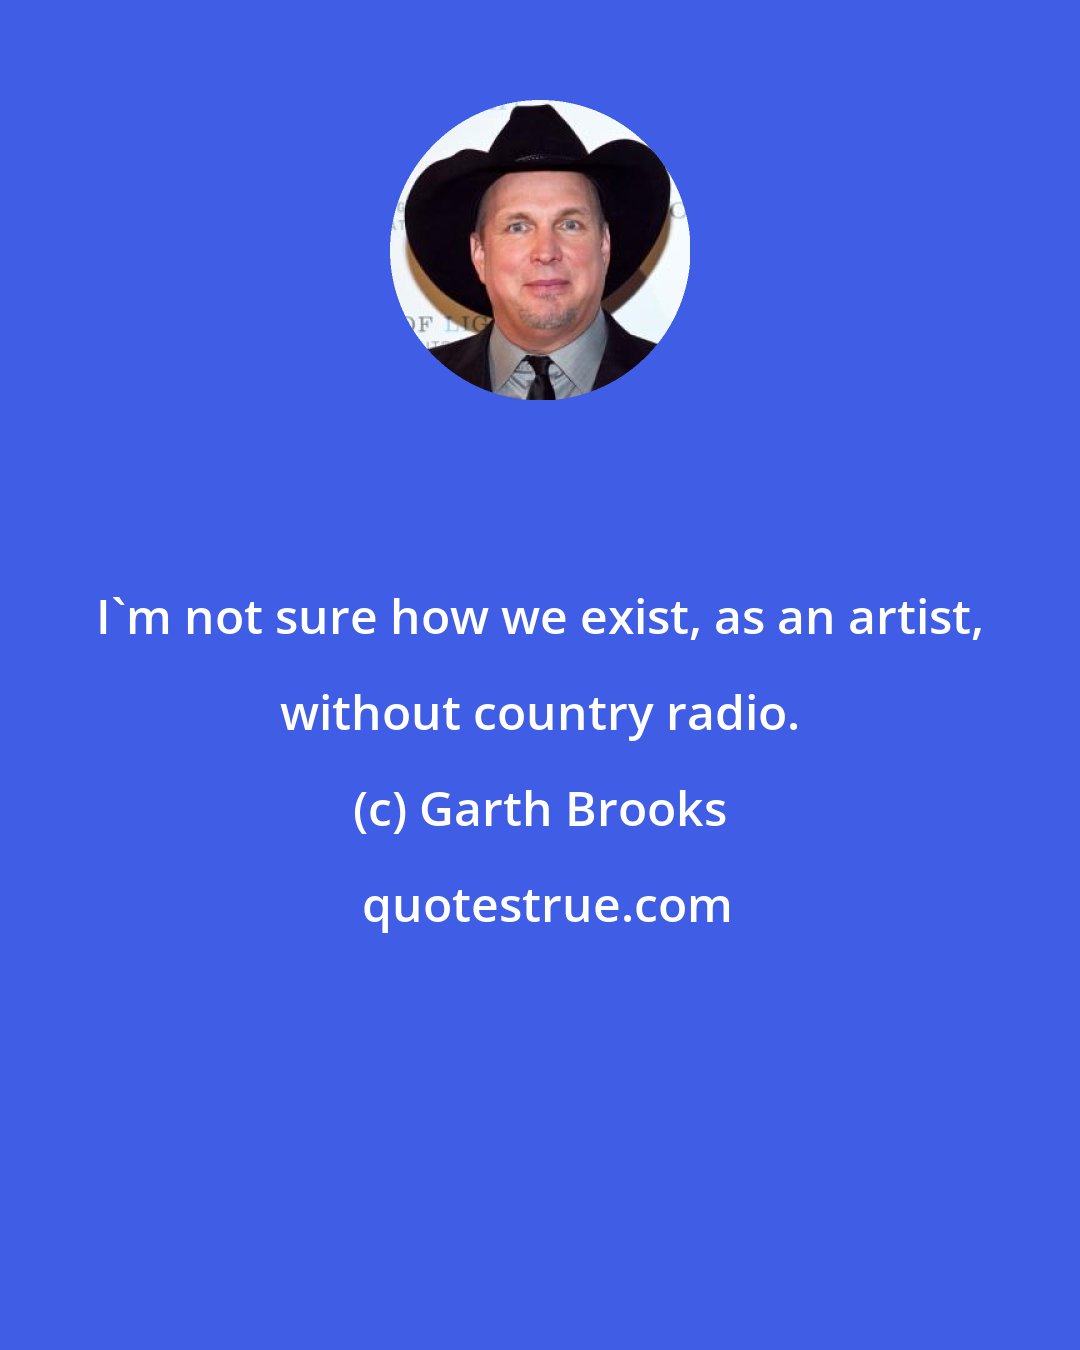 Garth Brooks: I'm not sure how we exist, as an artist, without country radio.